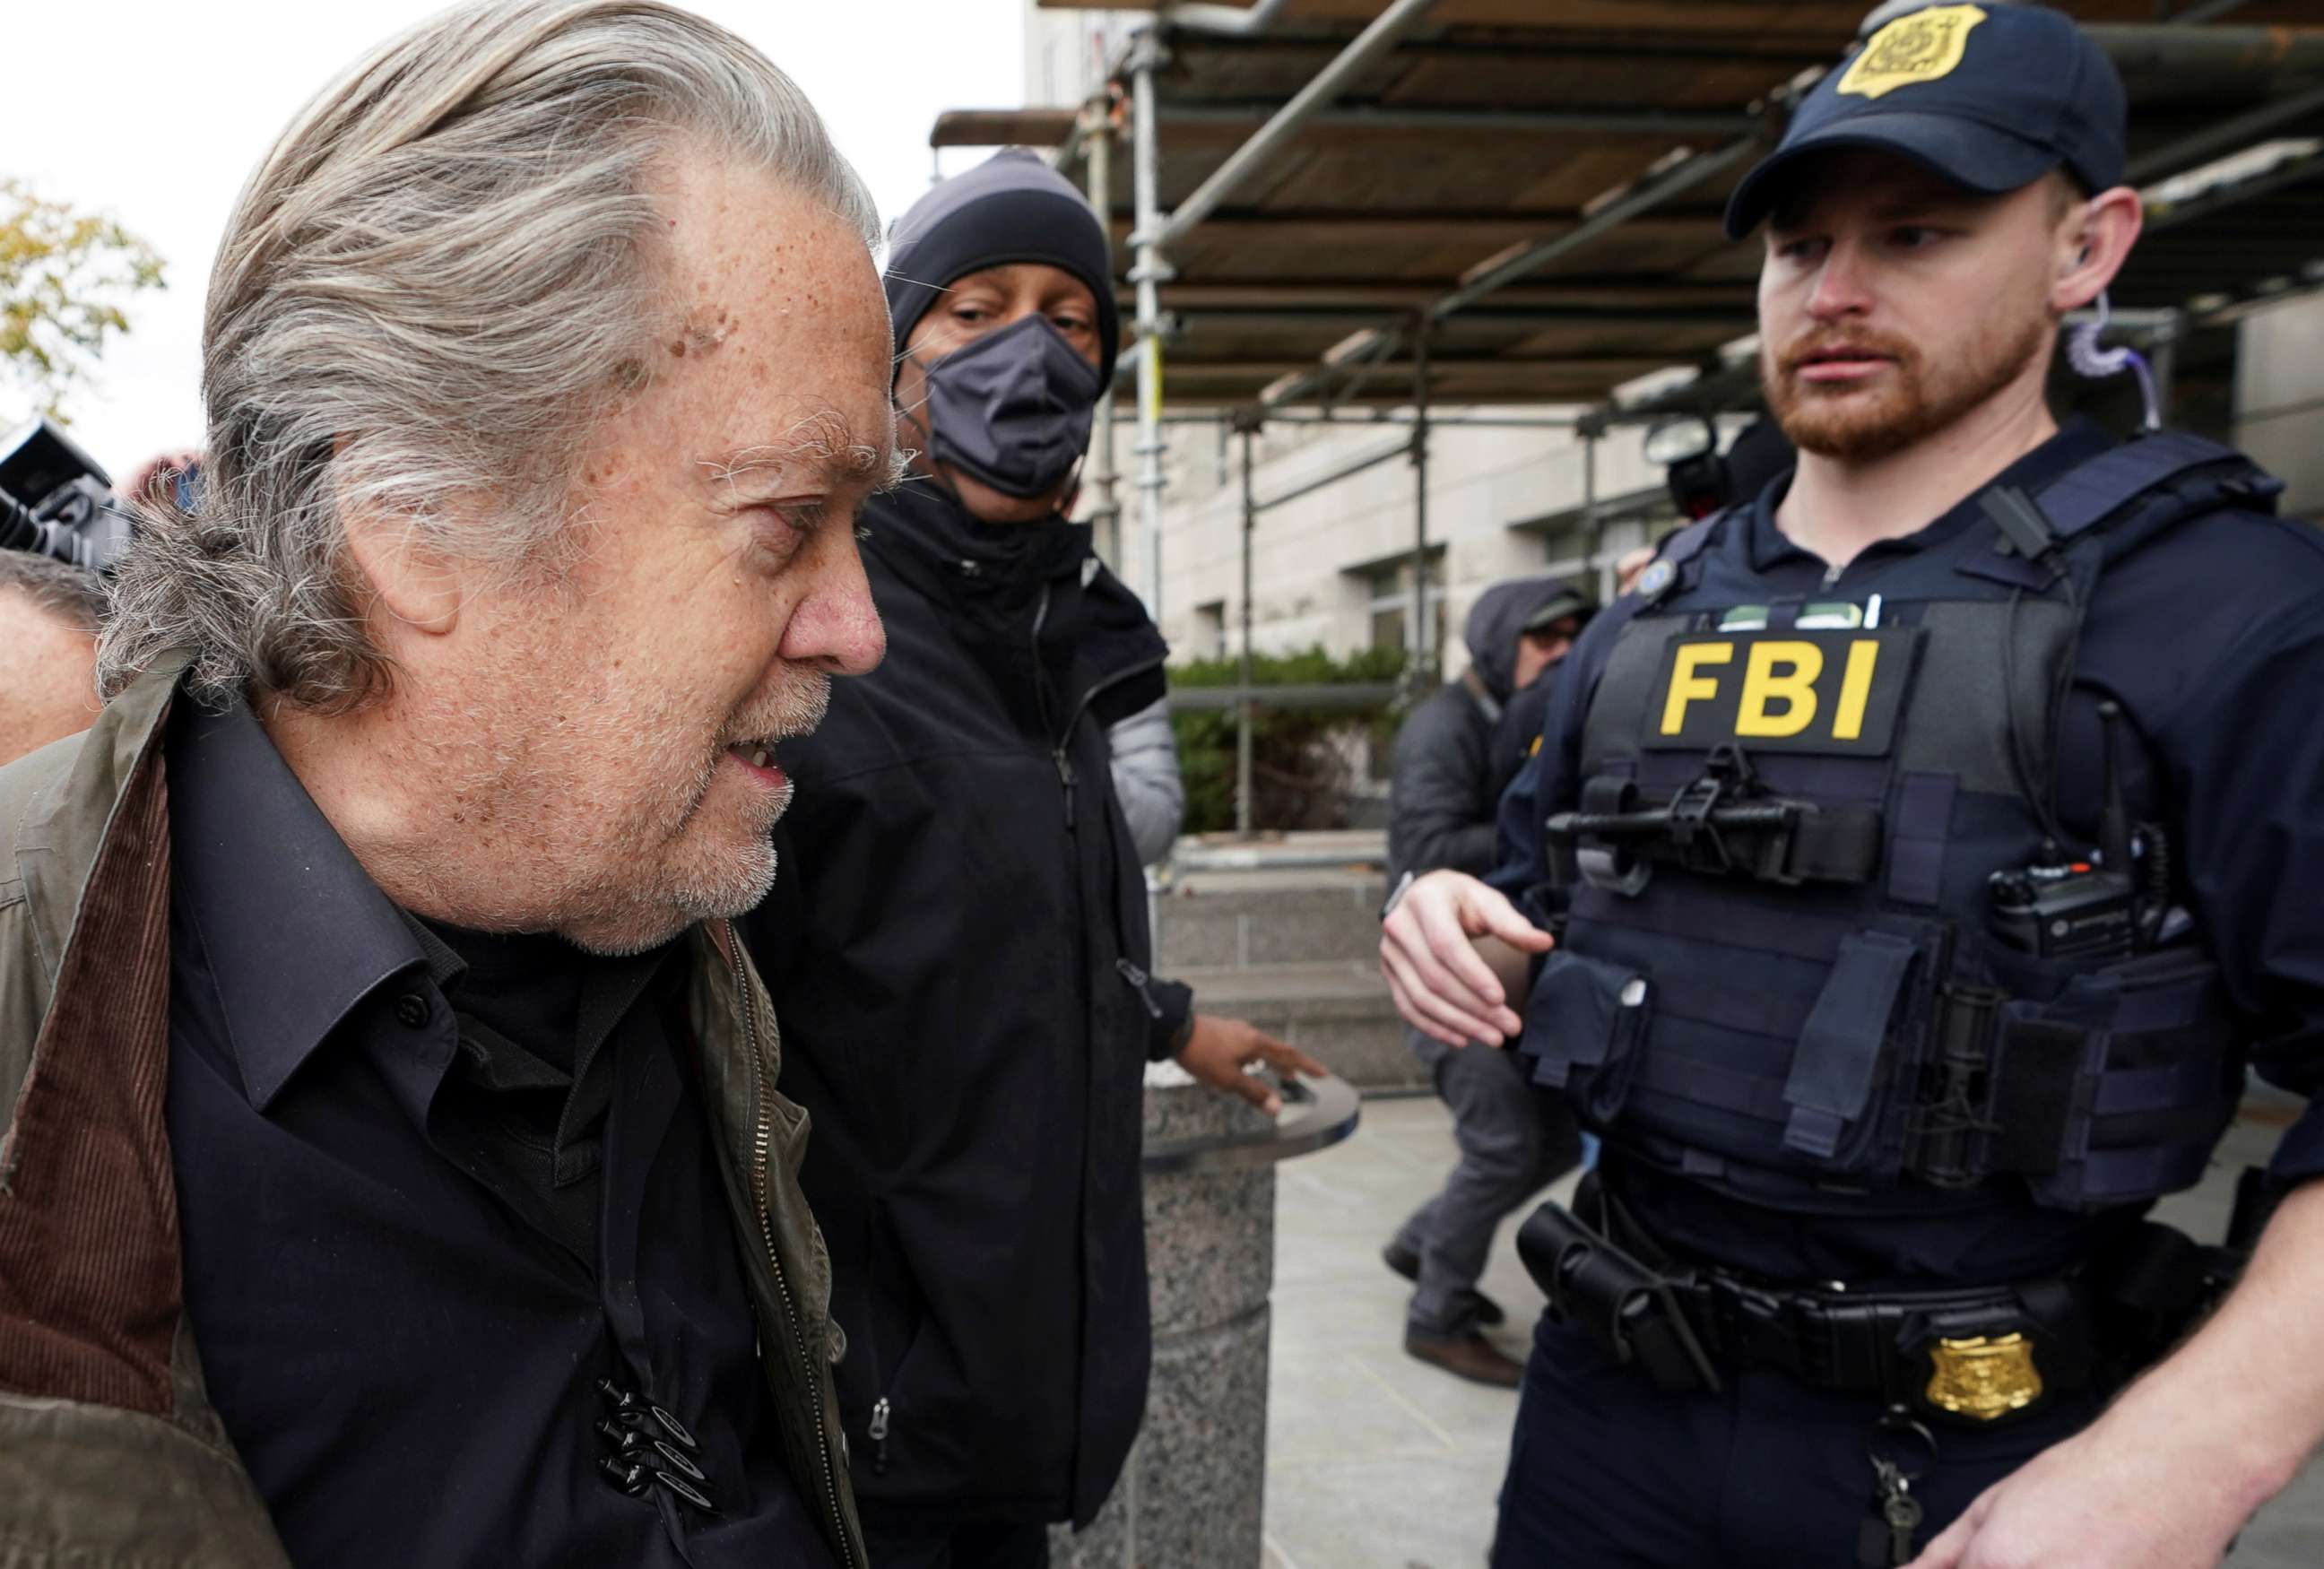 PHOTO: An FBI officer observes Steve Bannon, talk show host and former White House advisor to former President Donald Trump, as he arrives at the FBI's Washington field office to turn himself in to federal authorities in Washington, Nov. 15, 2021.